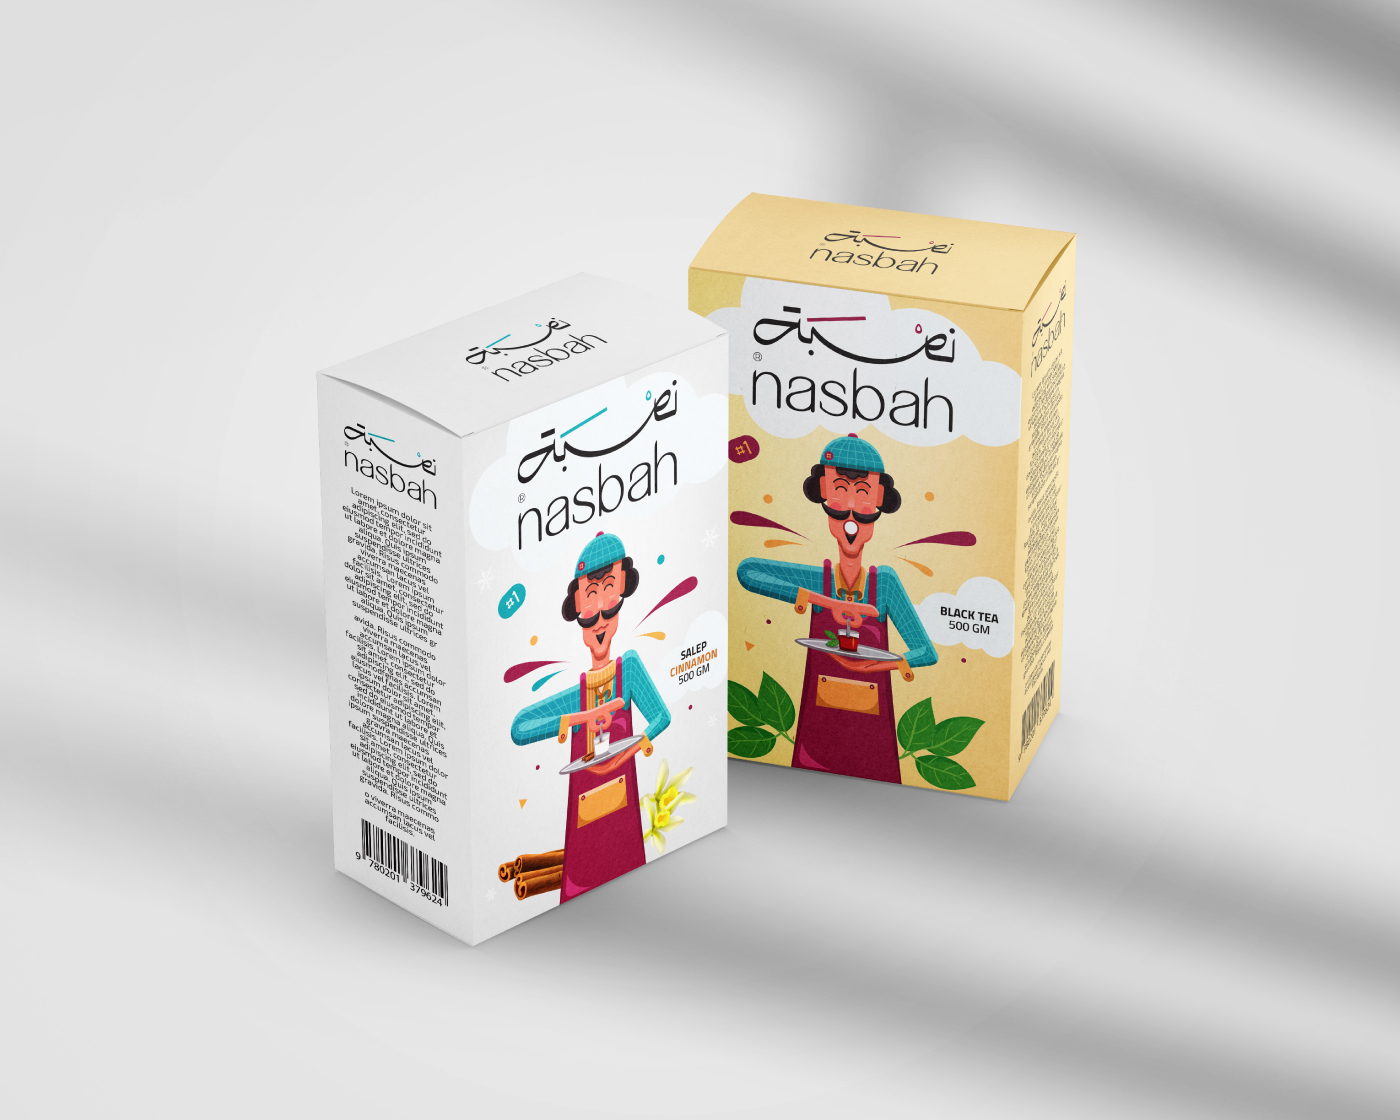 Introducing Nasbah: Egyptian Product Packaging Design